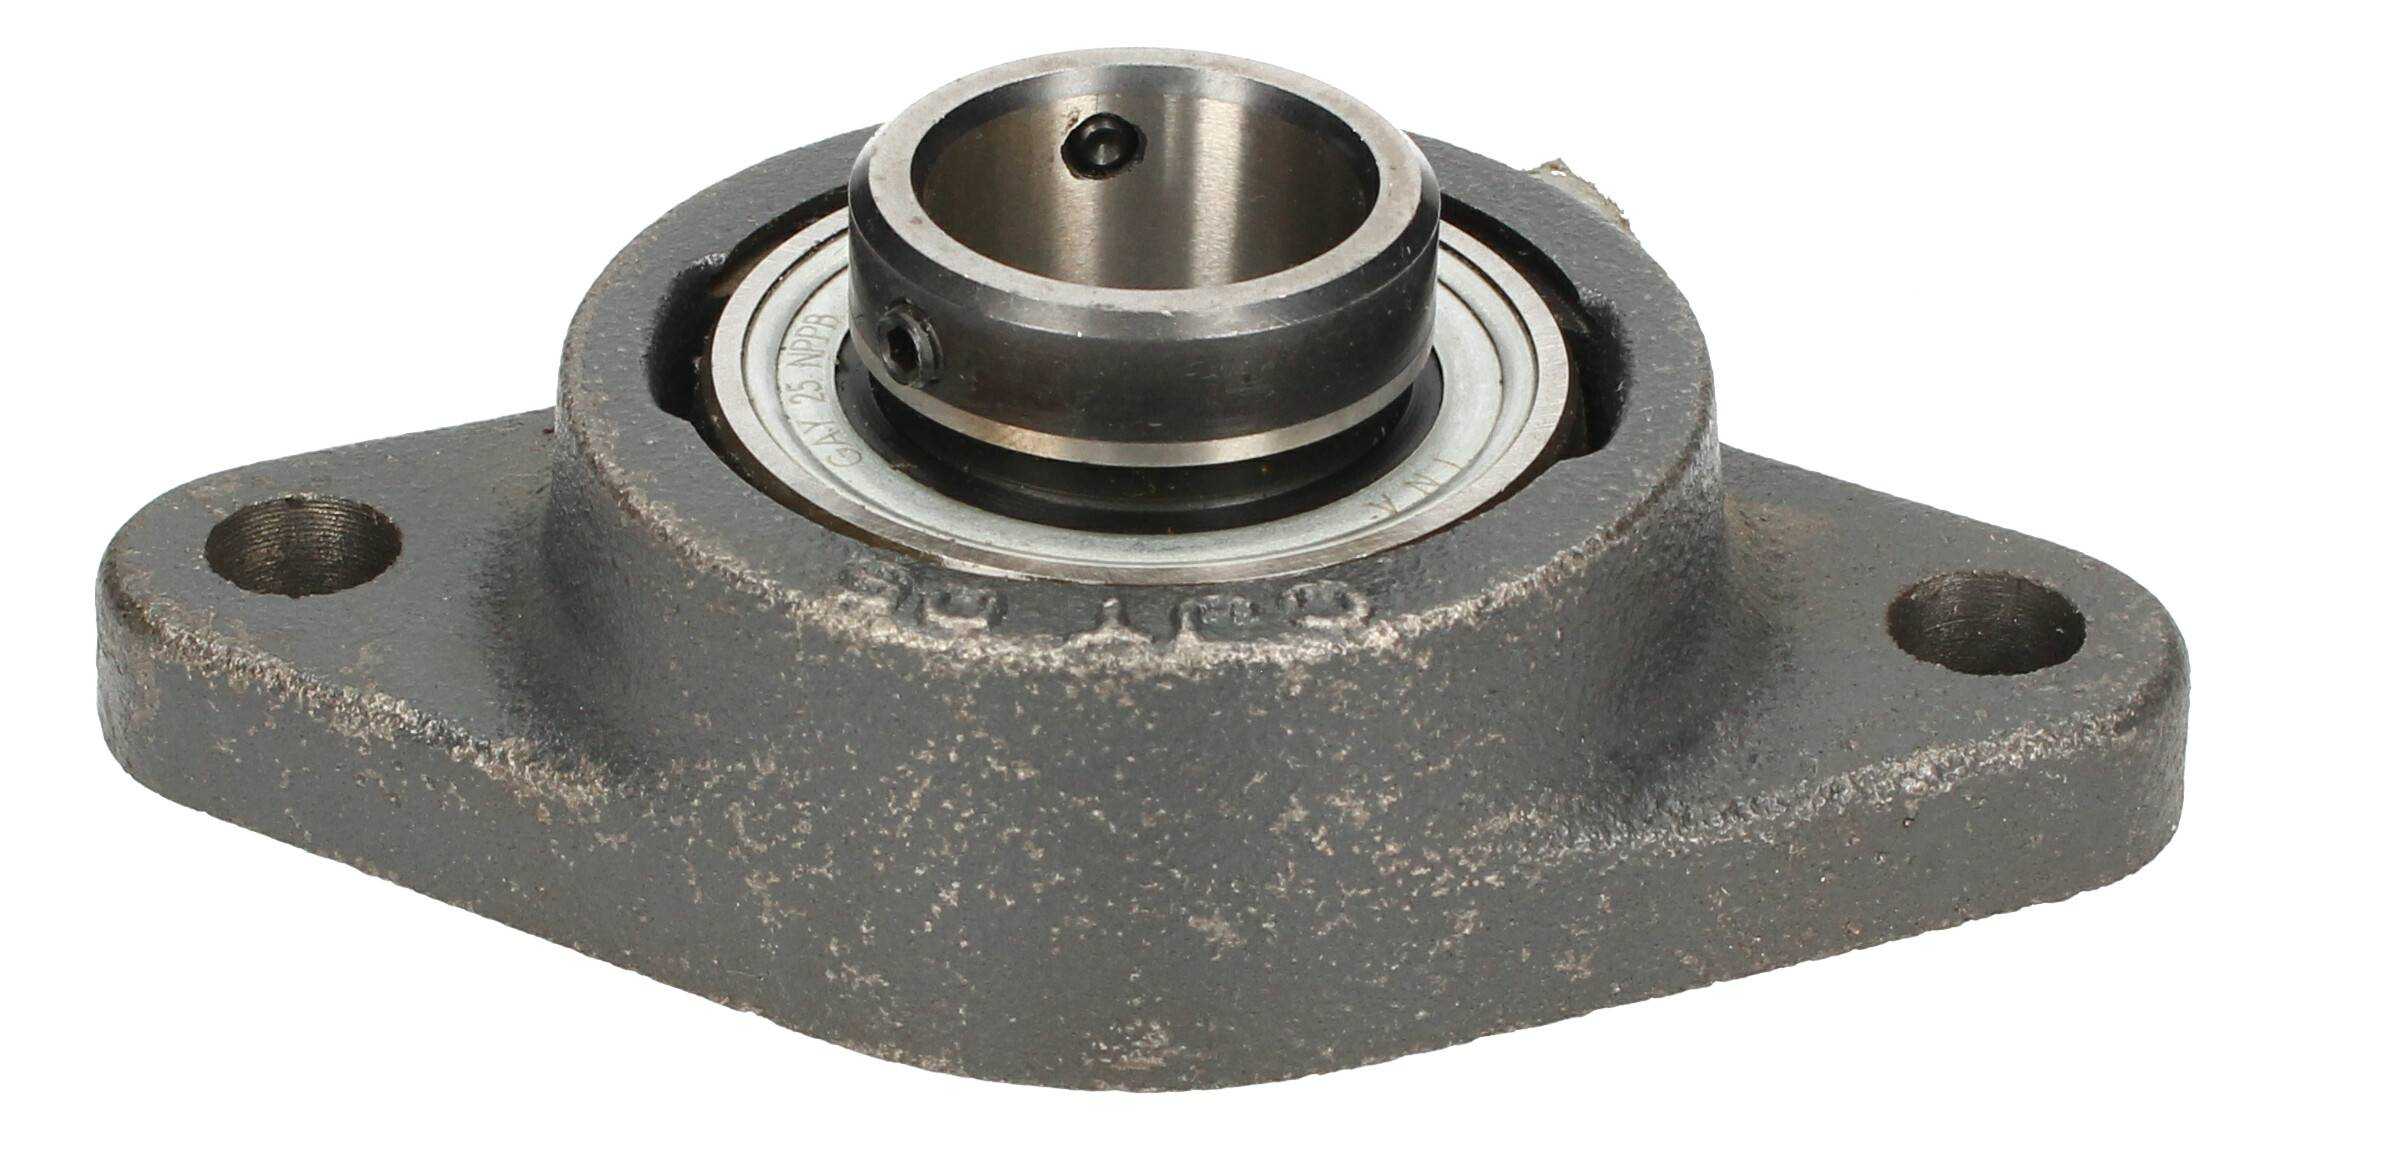 BEARING MOUNT TYPE UCFL-205-INA (RECONDITIONED) - Image 1